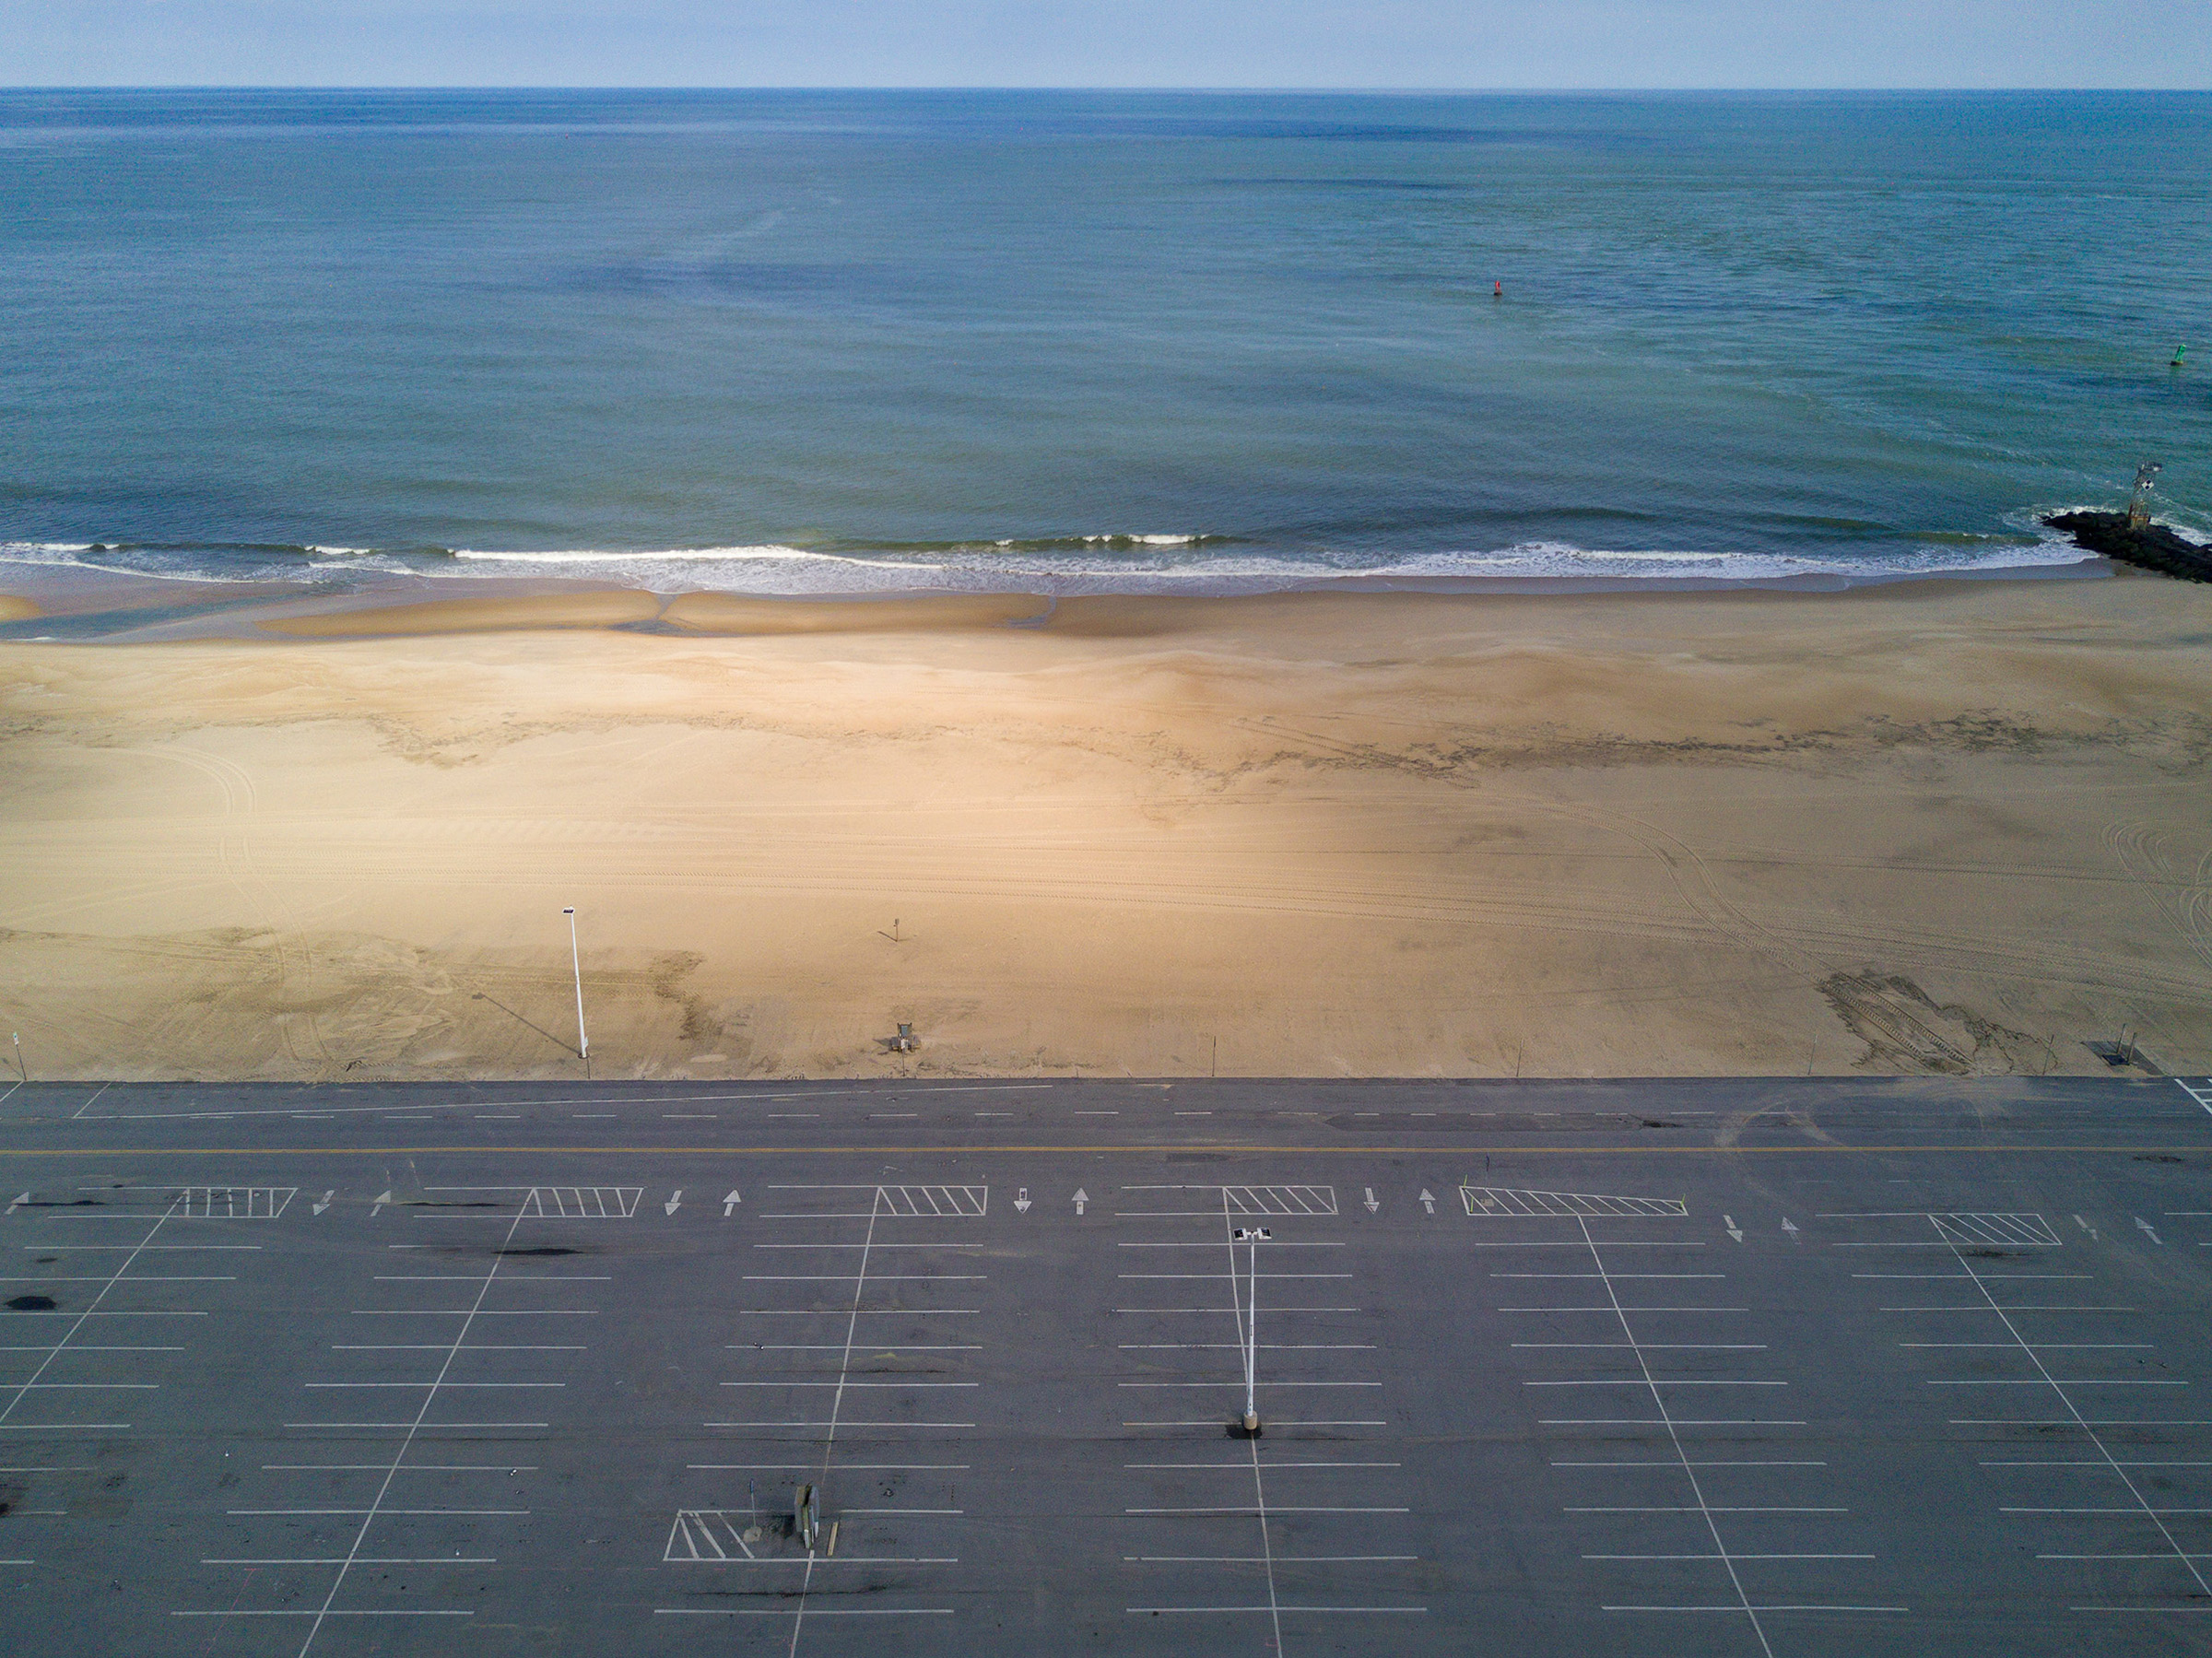 An empty parking lot in the beach town of Ocean City, Md., on April 16.